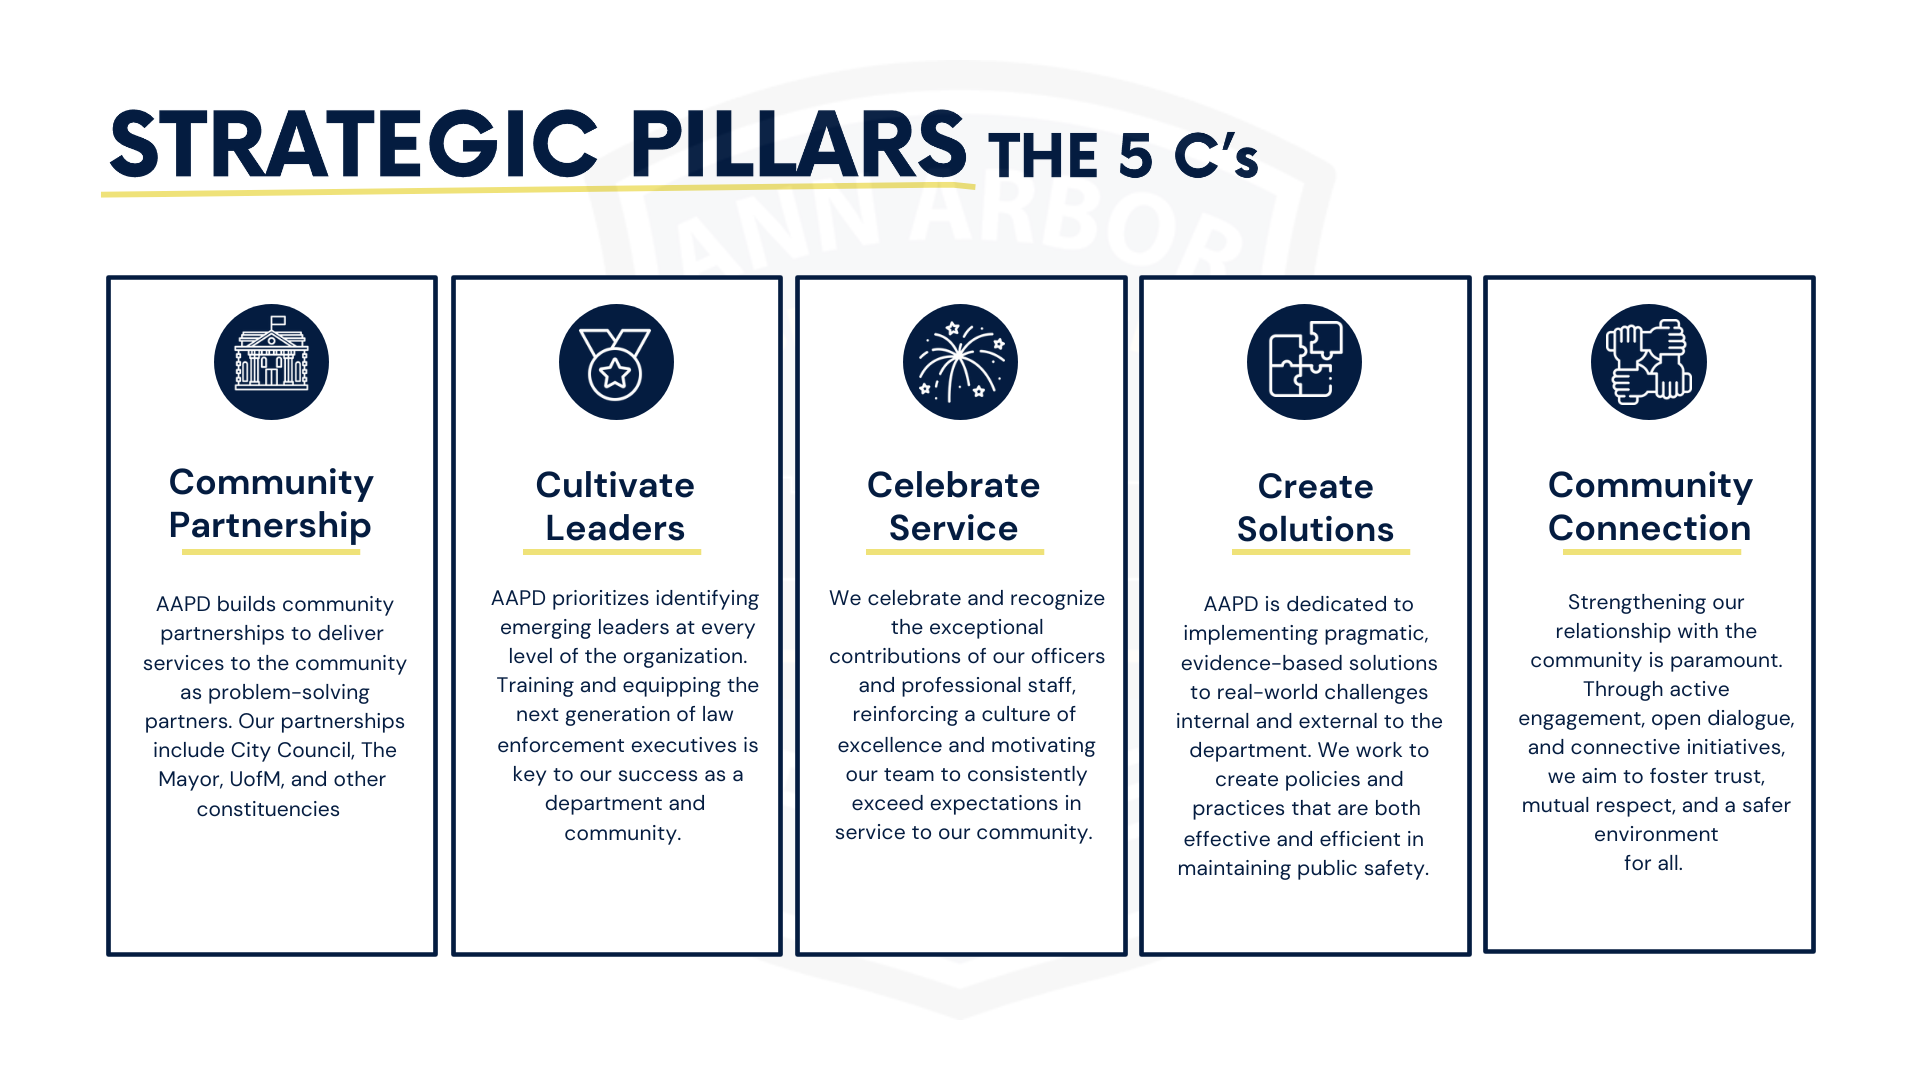 Strategic pillars: the five c's. Community partnership, cultivate leaders, celebrate service, create solutions, community connection